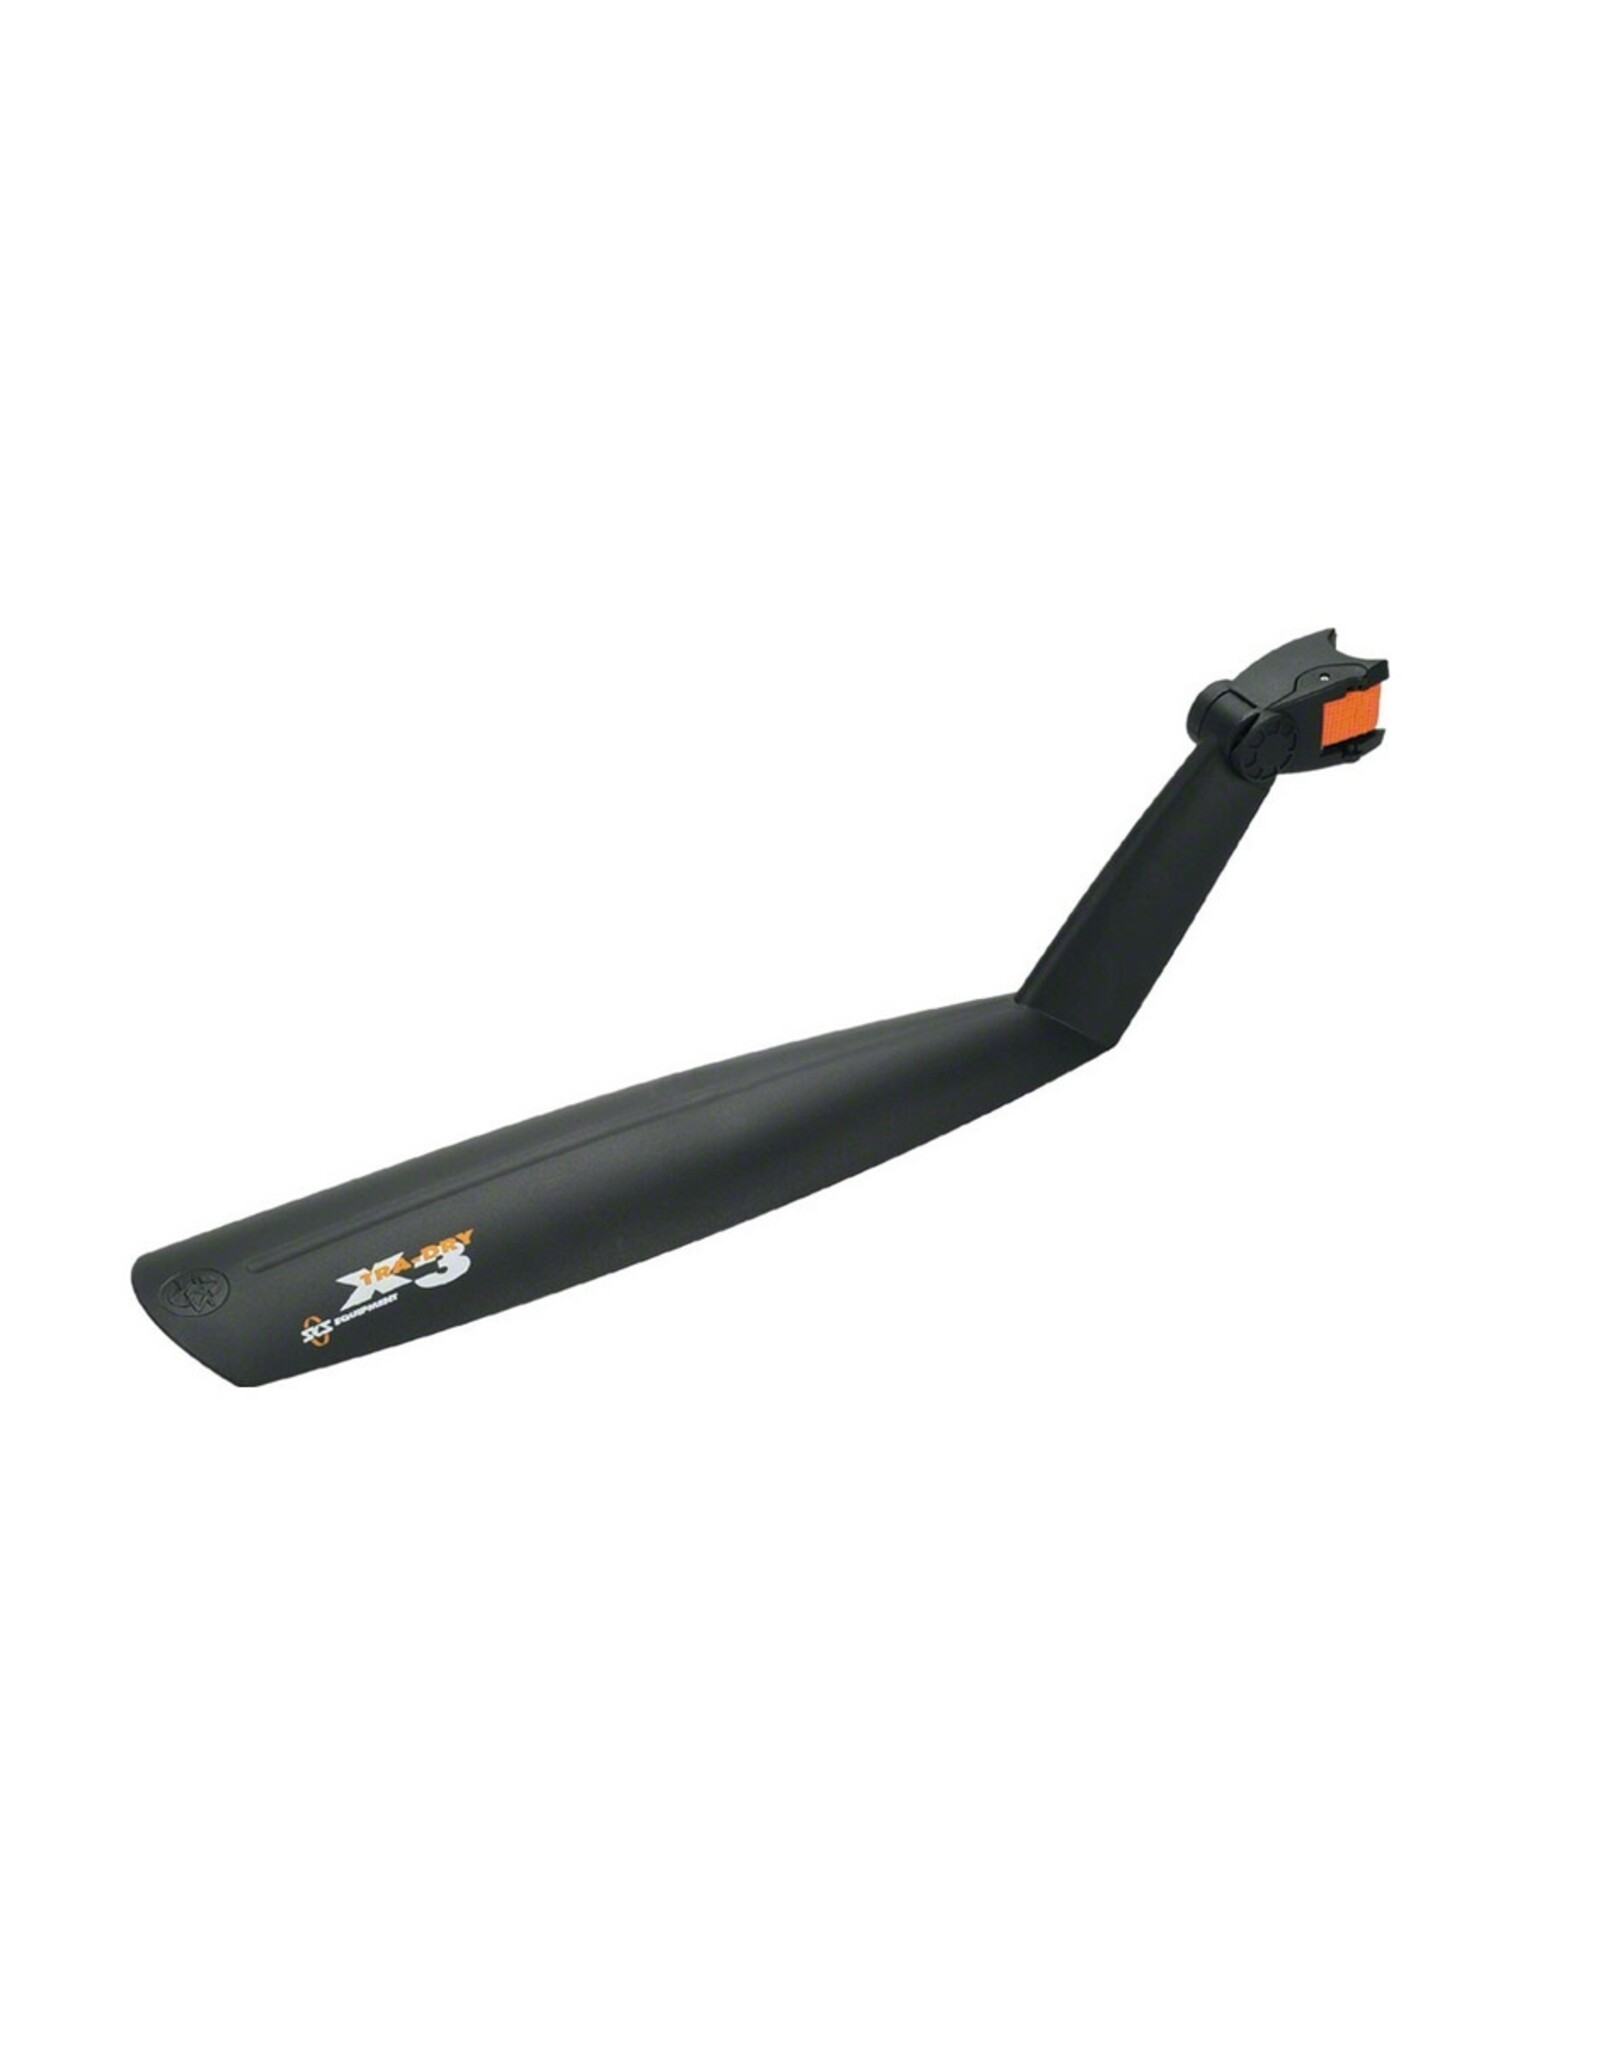 SKS SKS X-tra Dry Quick Release Fender